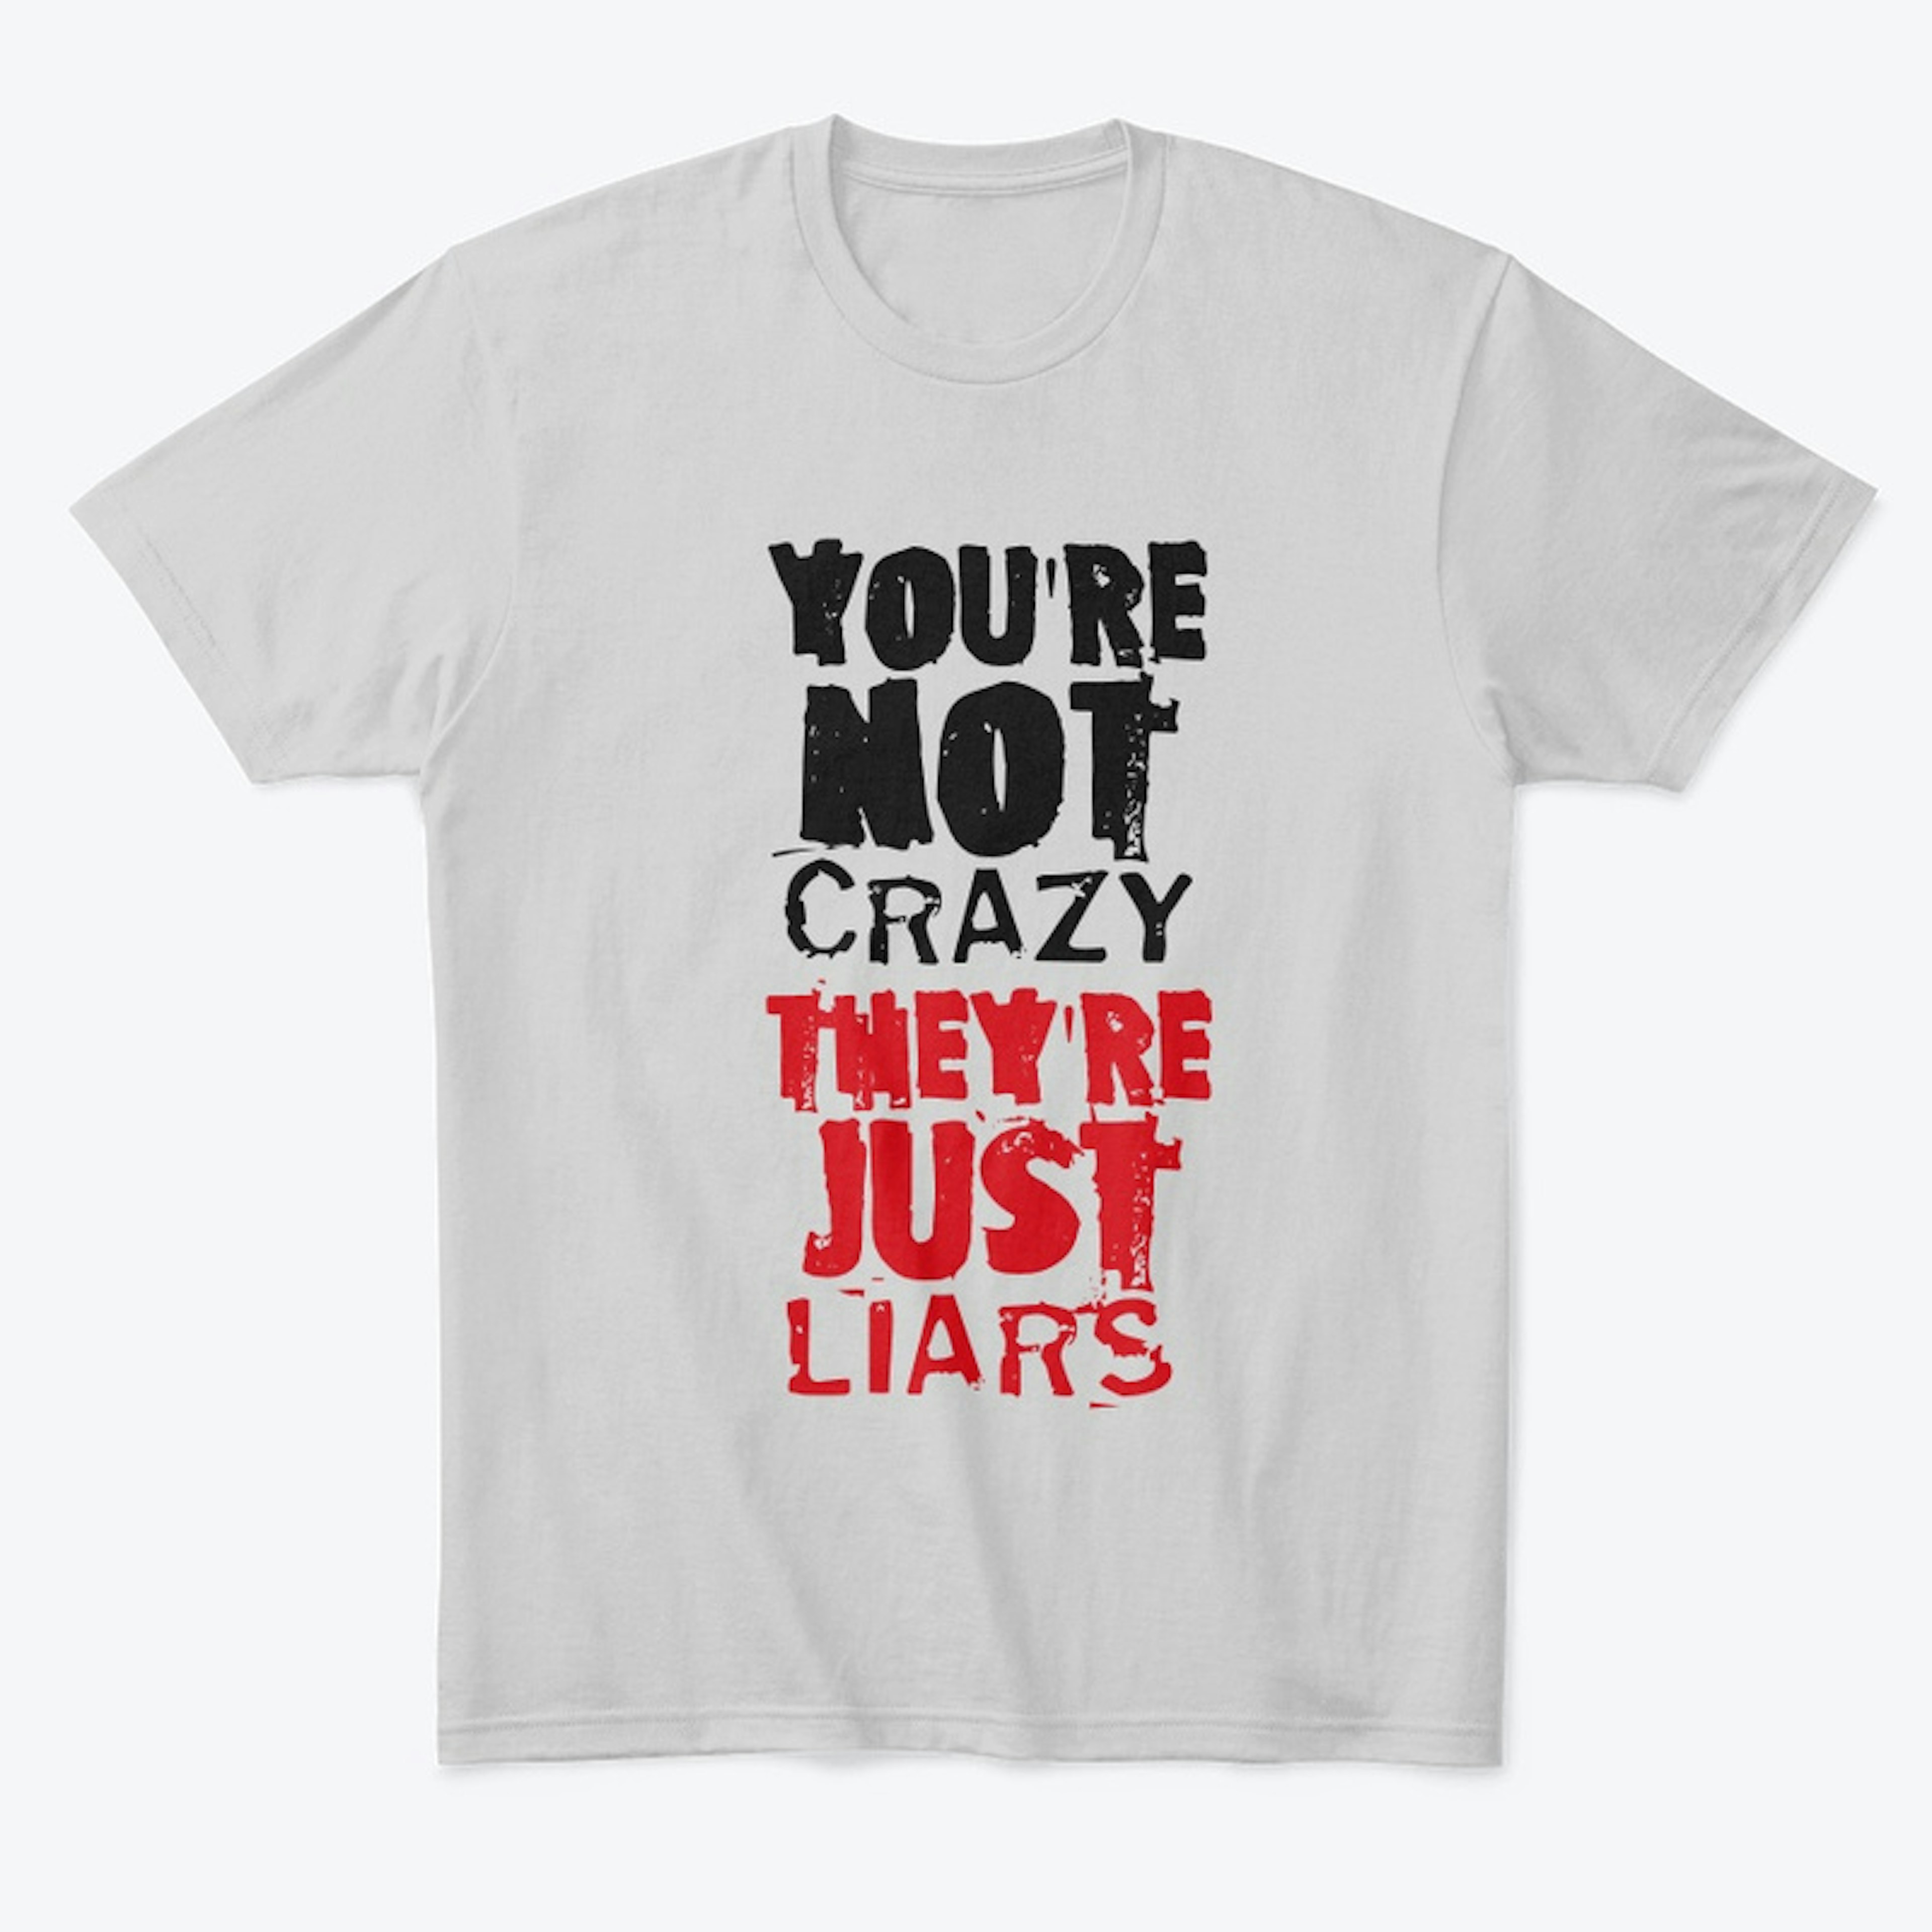 You're NOT Crazy